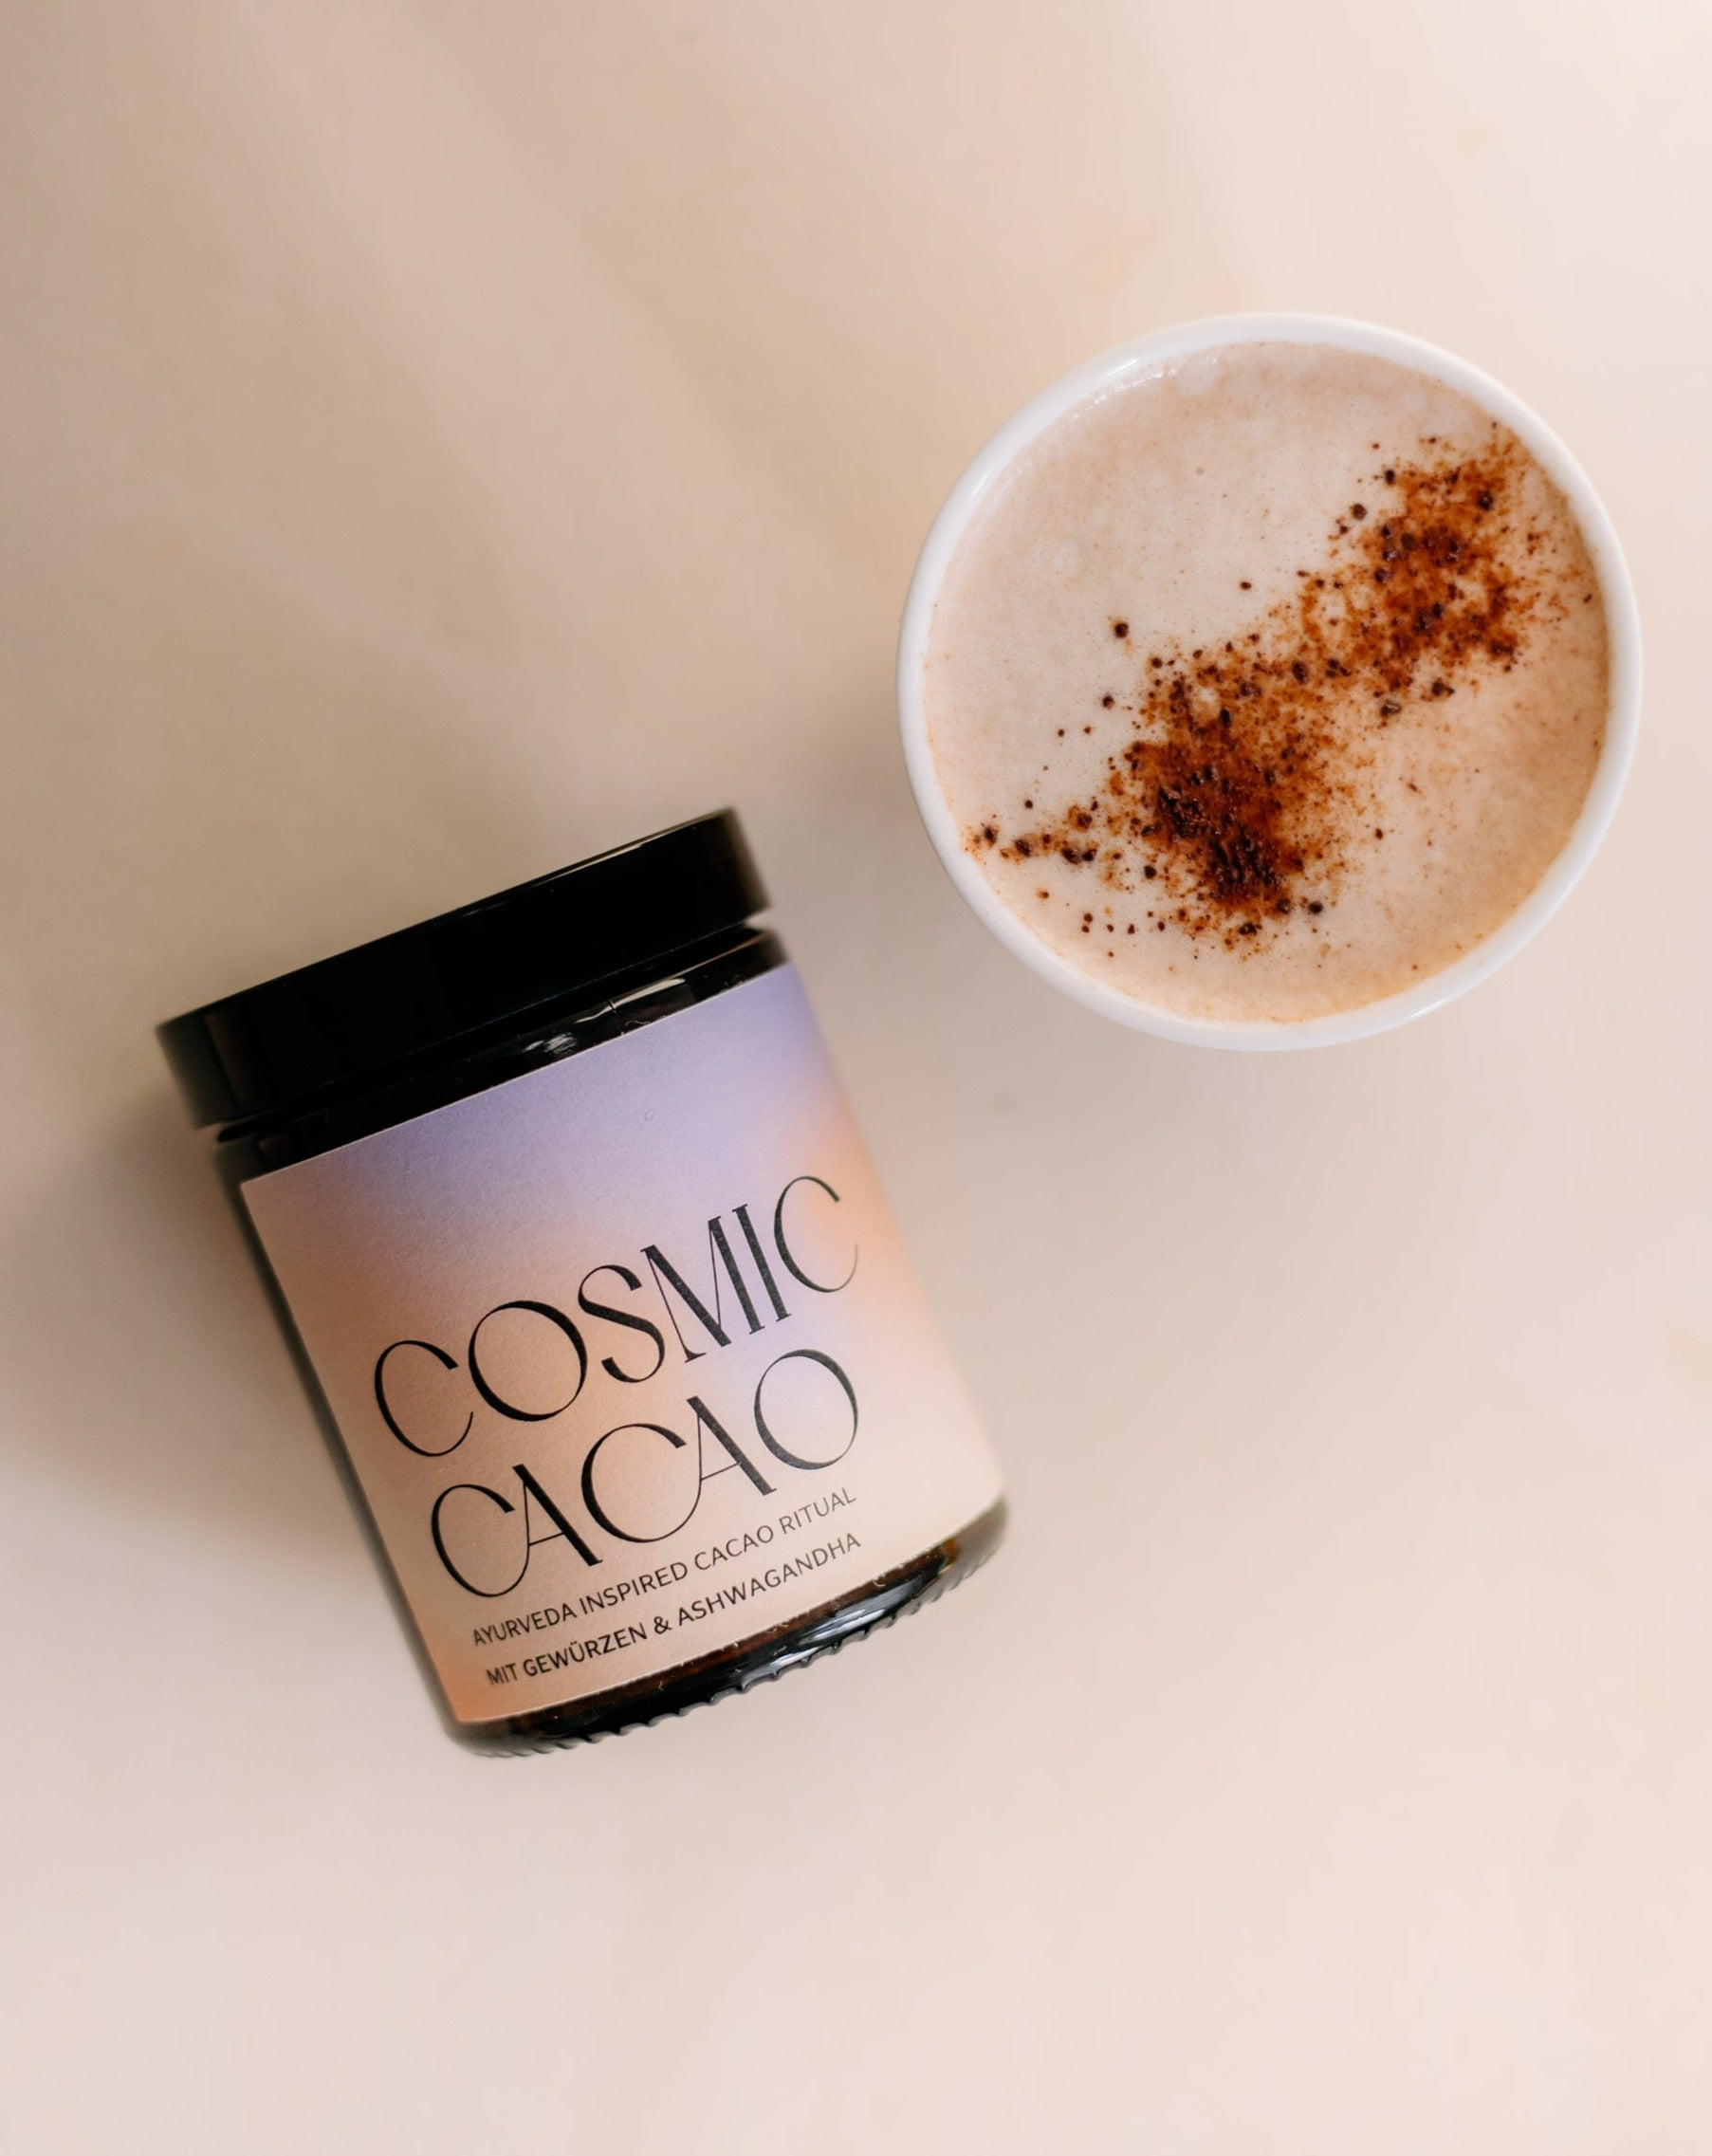 Cosmic Cacao von Ayurveda Soulfood